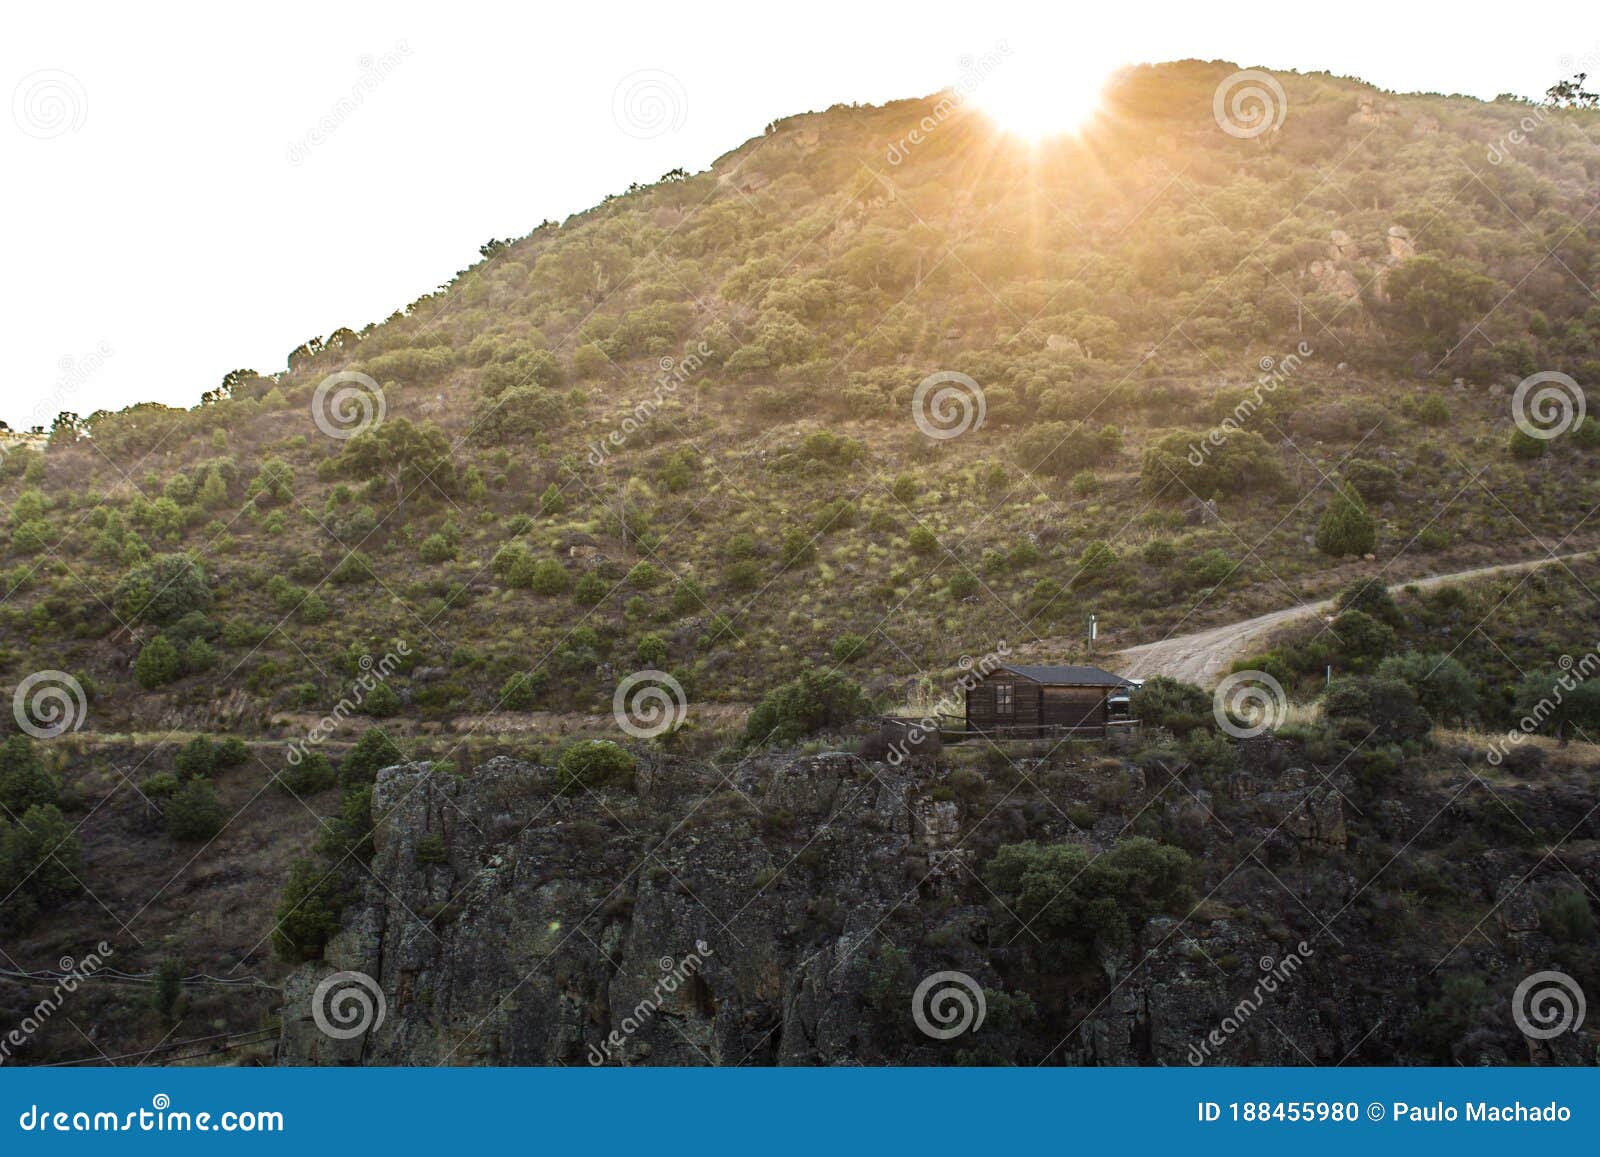 mountain house in douro internacional park at the sunset, in braganÃÂ§a